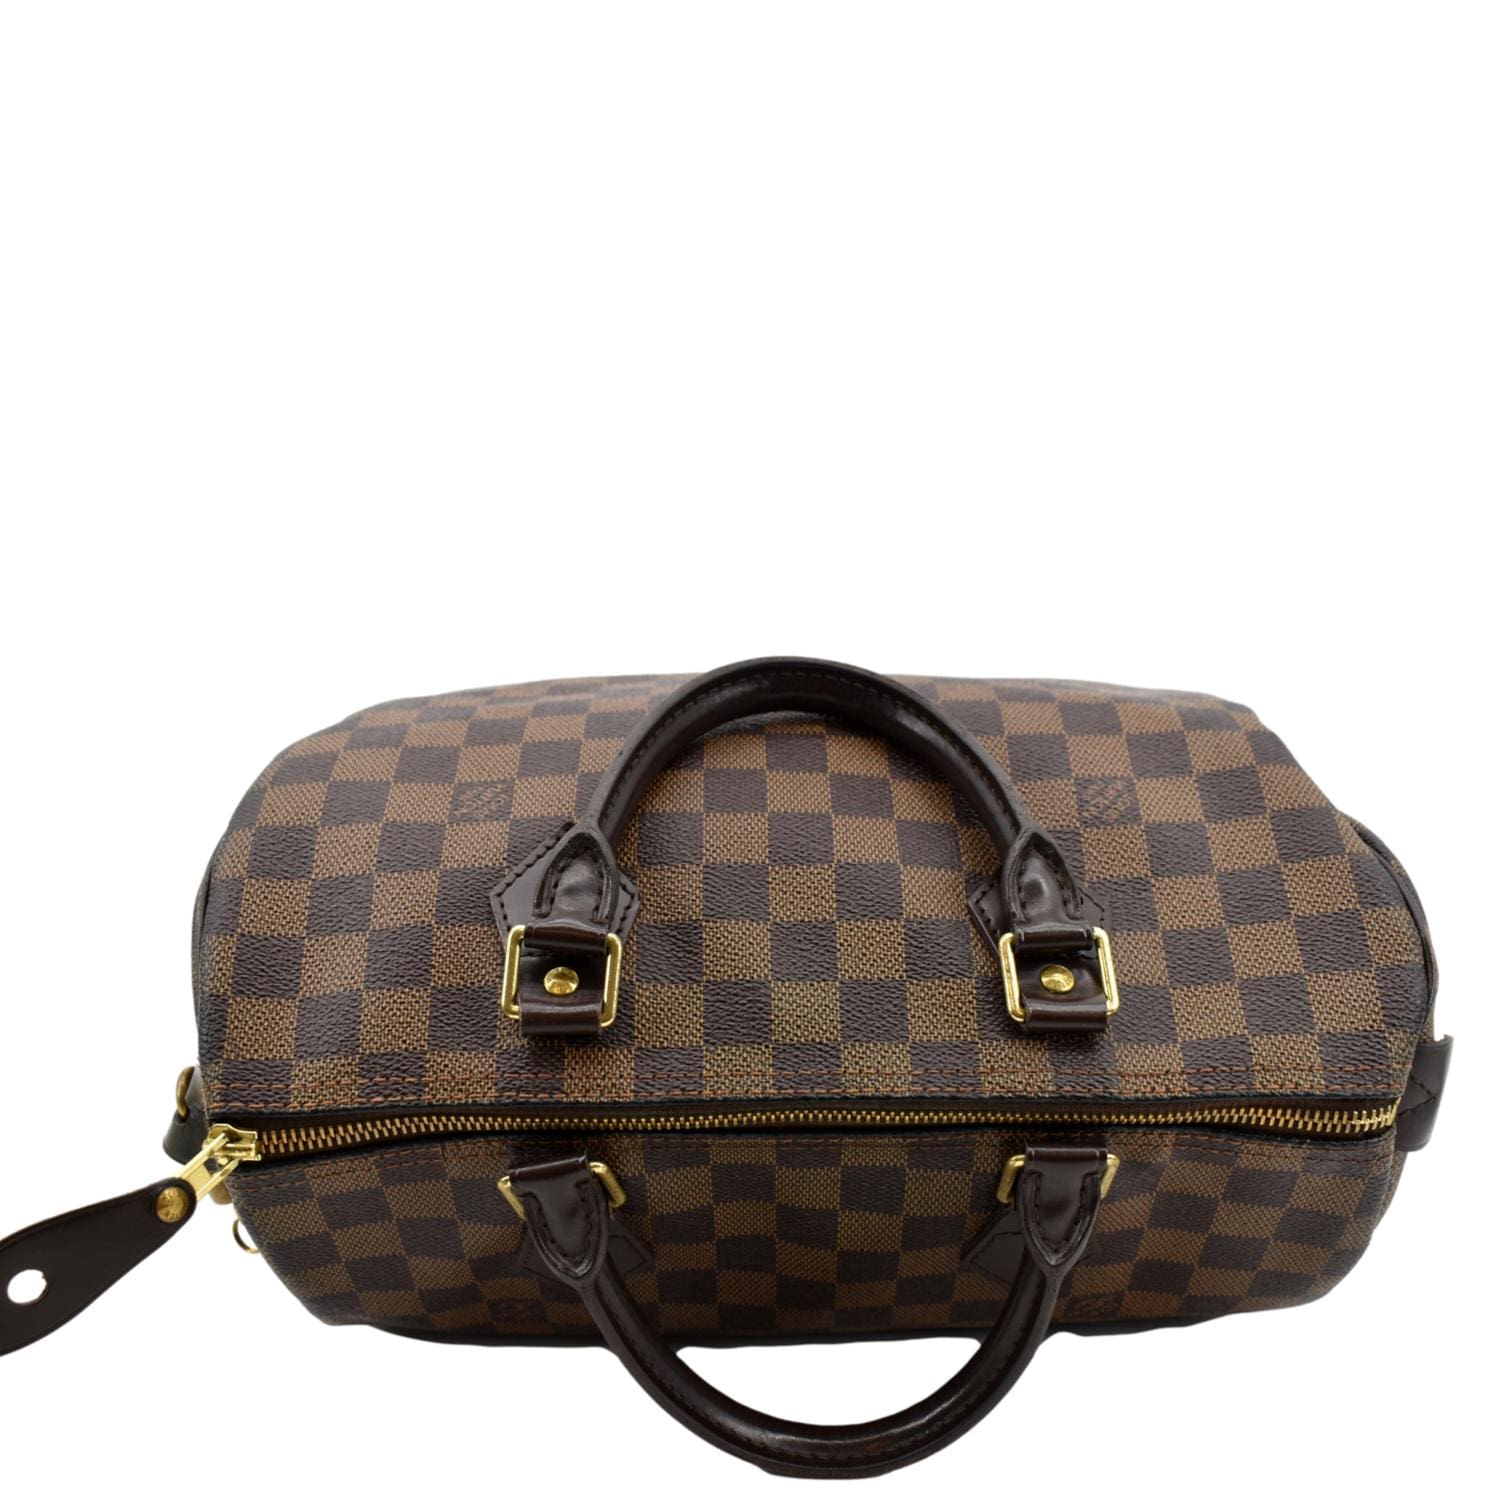 Vintage Louis Vuitton Luggage and Travel Bags - 479 For Sale at